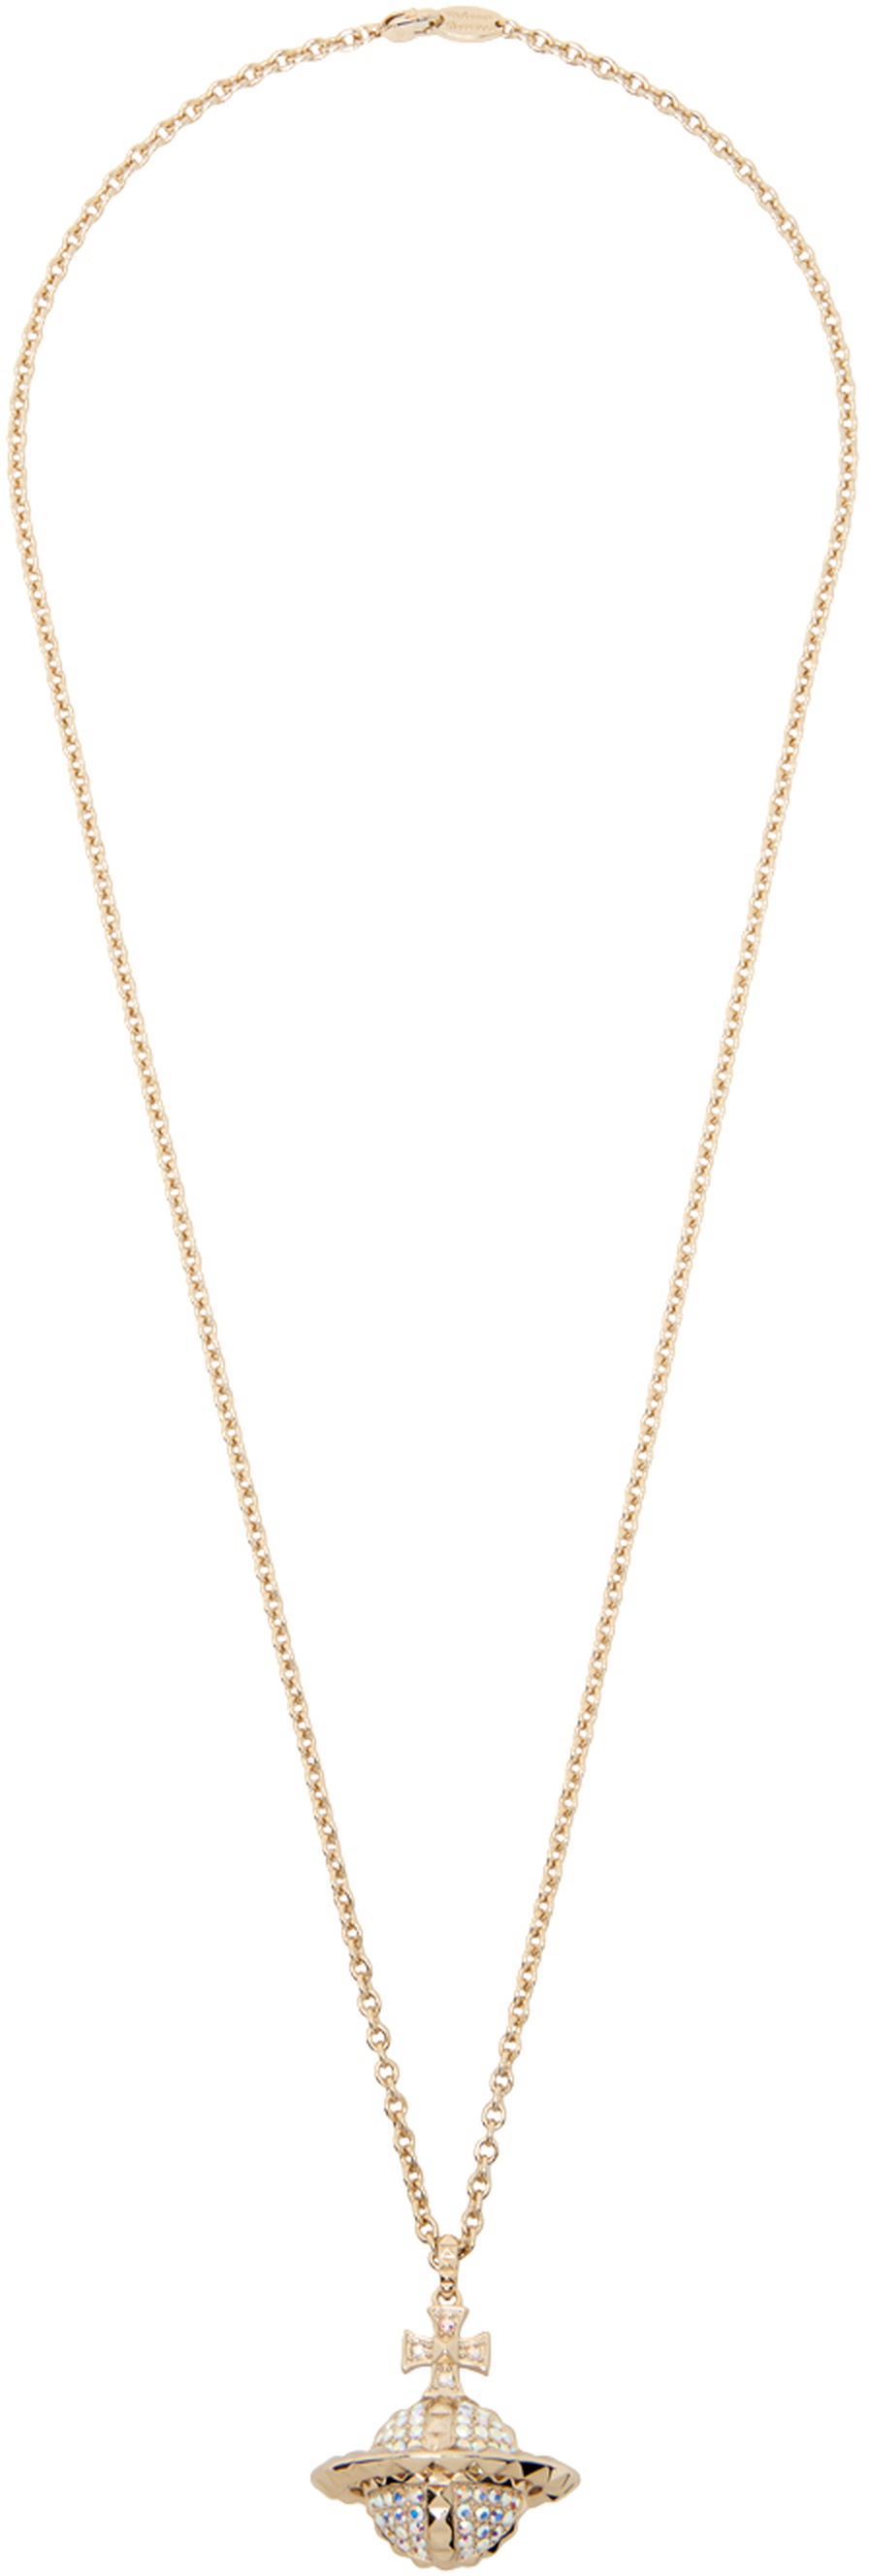 Vivienne Westwood Orb Shooting Star Necklace Cream,Silver | PLAYFUL